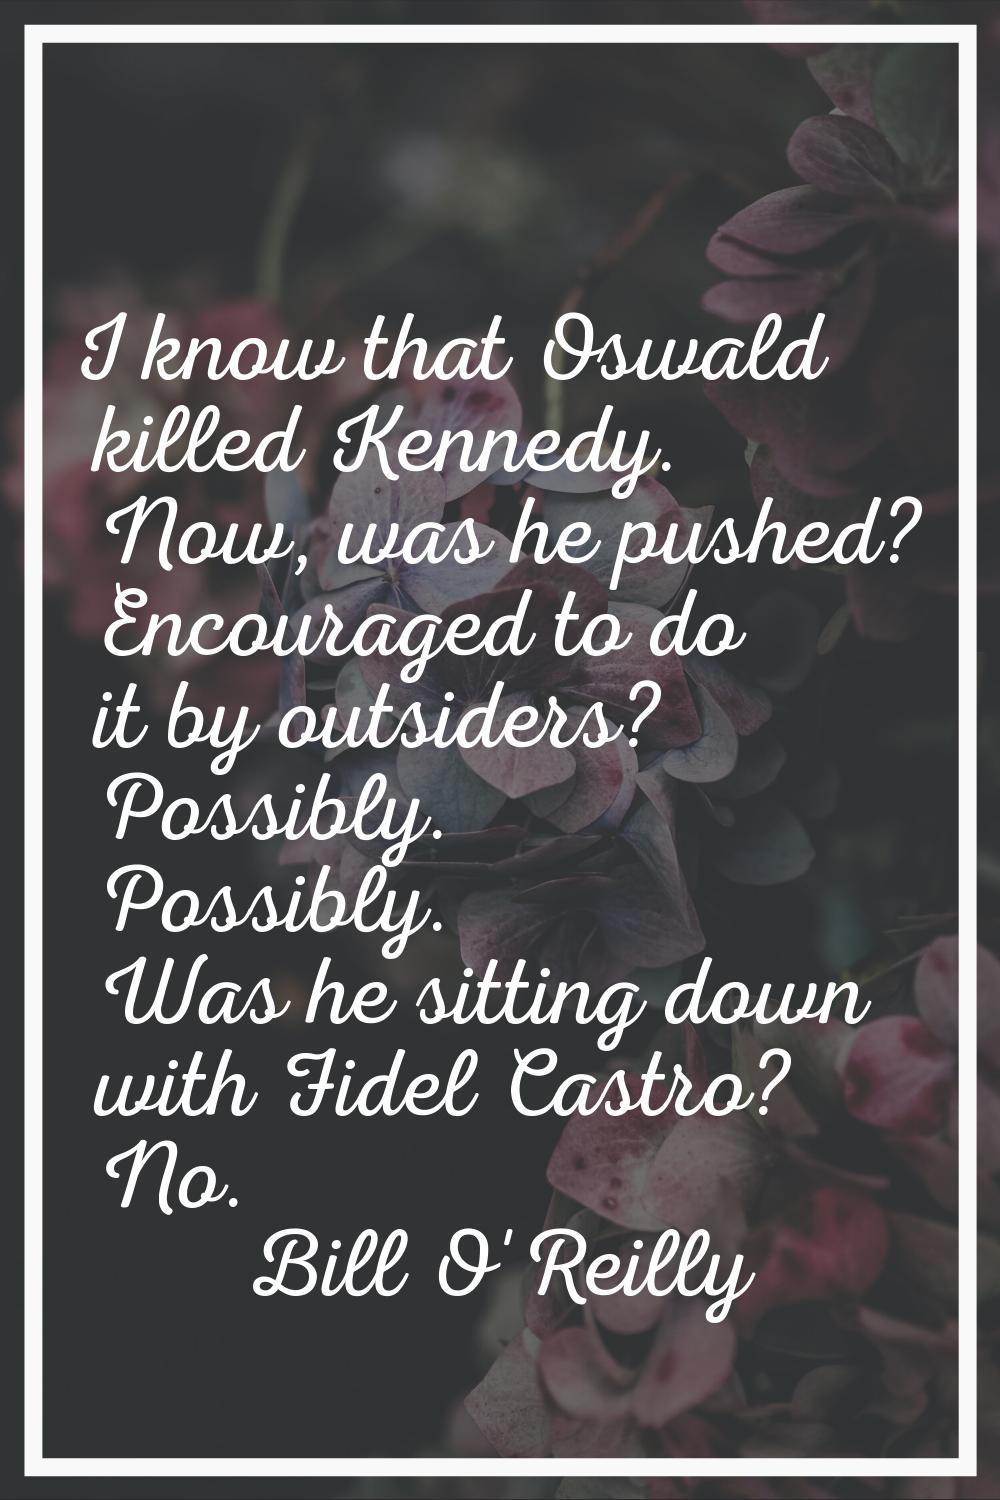 I know that Oswald killed Kennedy. Now, was he pushed? Encouraged to do it by outsiders? Possibly. 